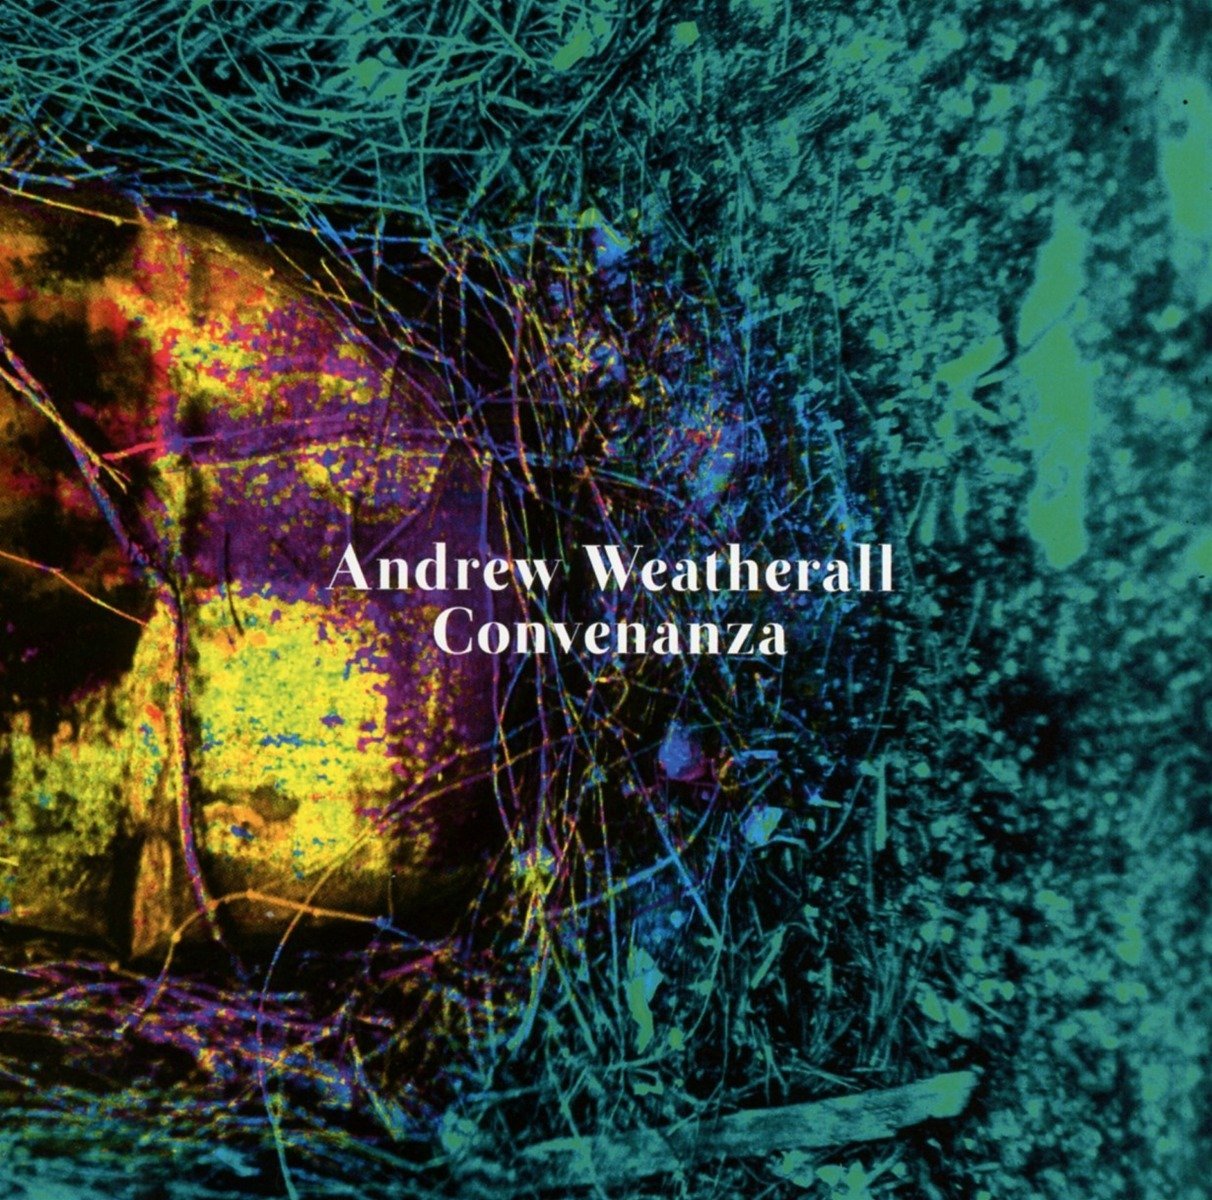 Andrew Weatherall - Convenanza (Rotters Golf Club) 2